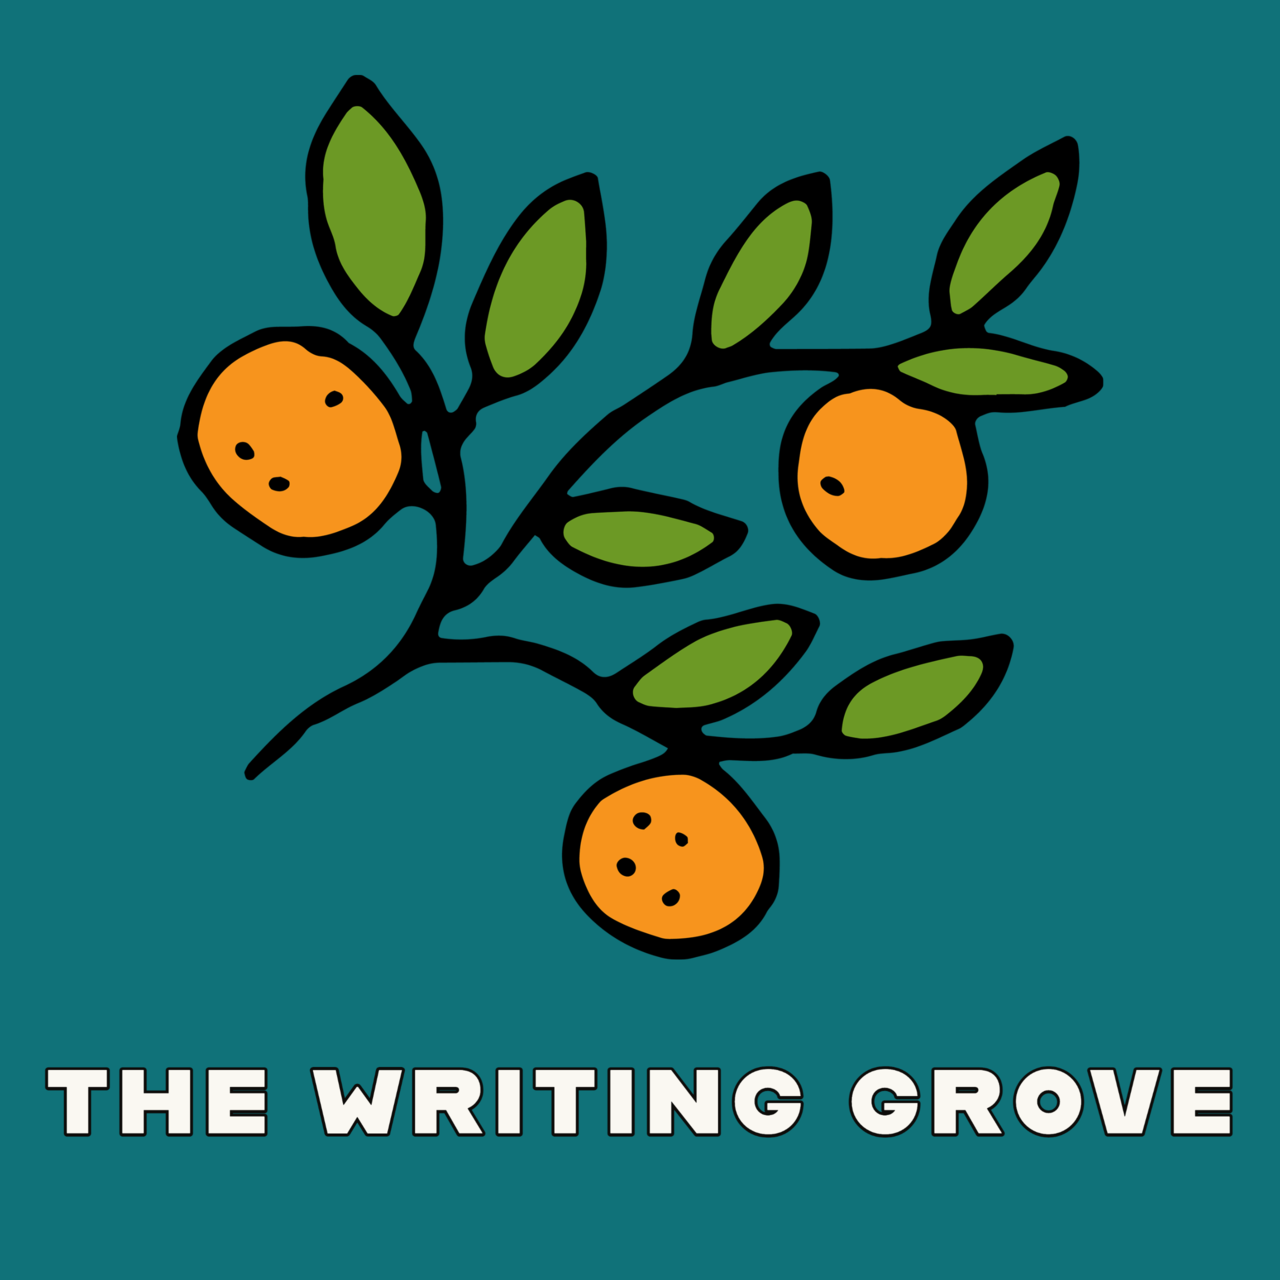 Artwork for the writing grove